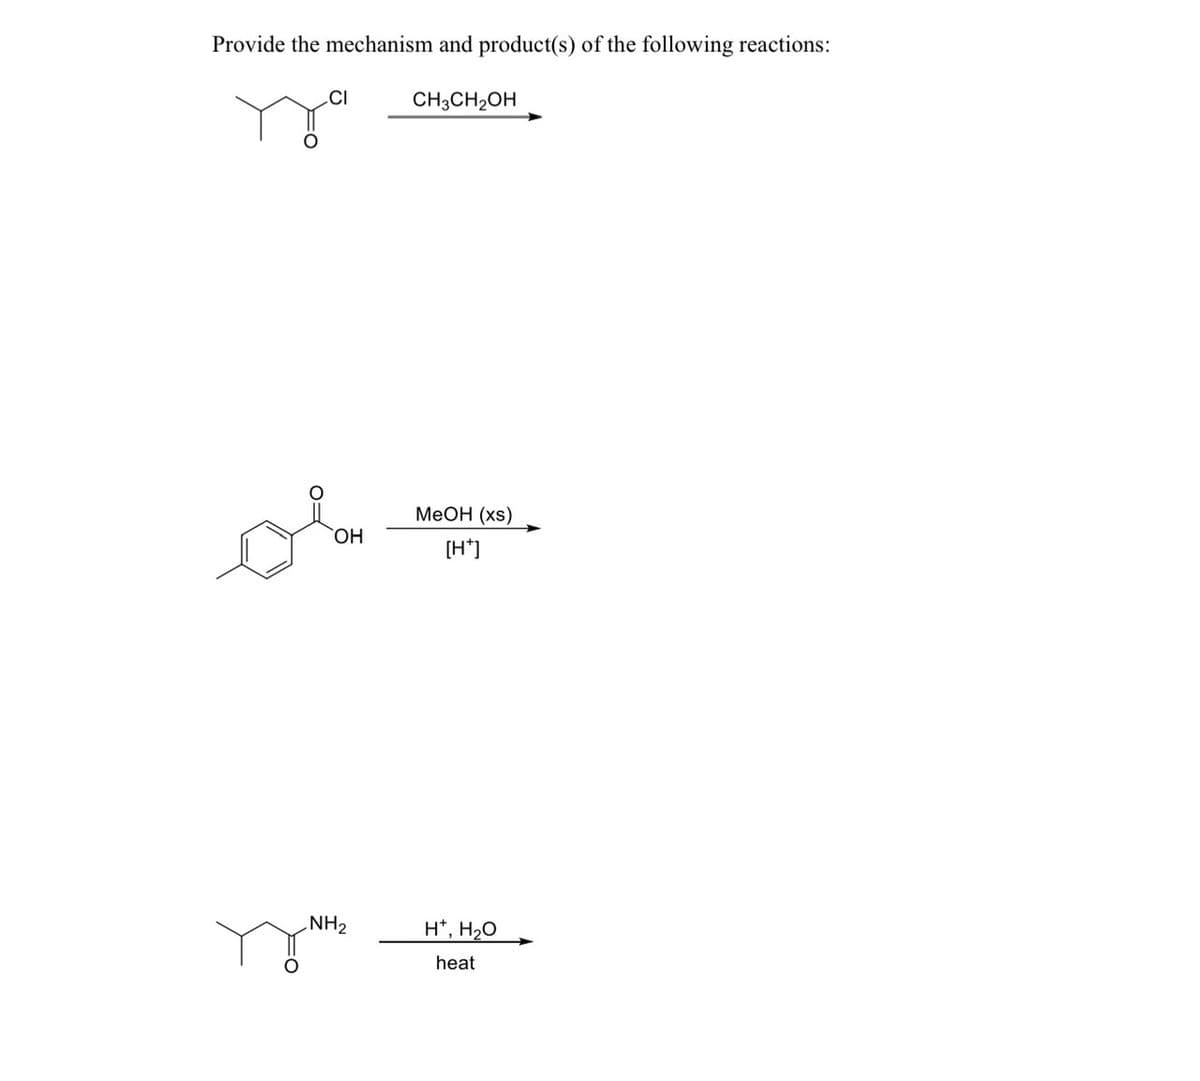 Provide the mechanism and product(s) of the following reactions:
CH3CH₂OH
O
CI
or
OH
NH₂
MeOH (xs)
[H*]
H*, H₂O
heat